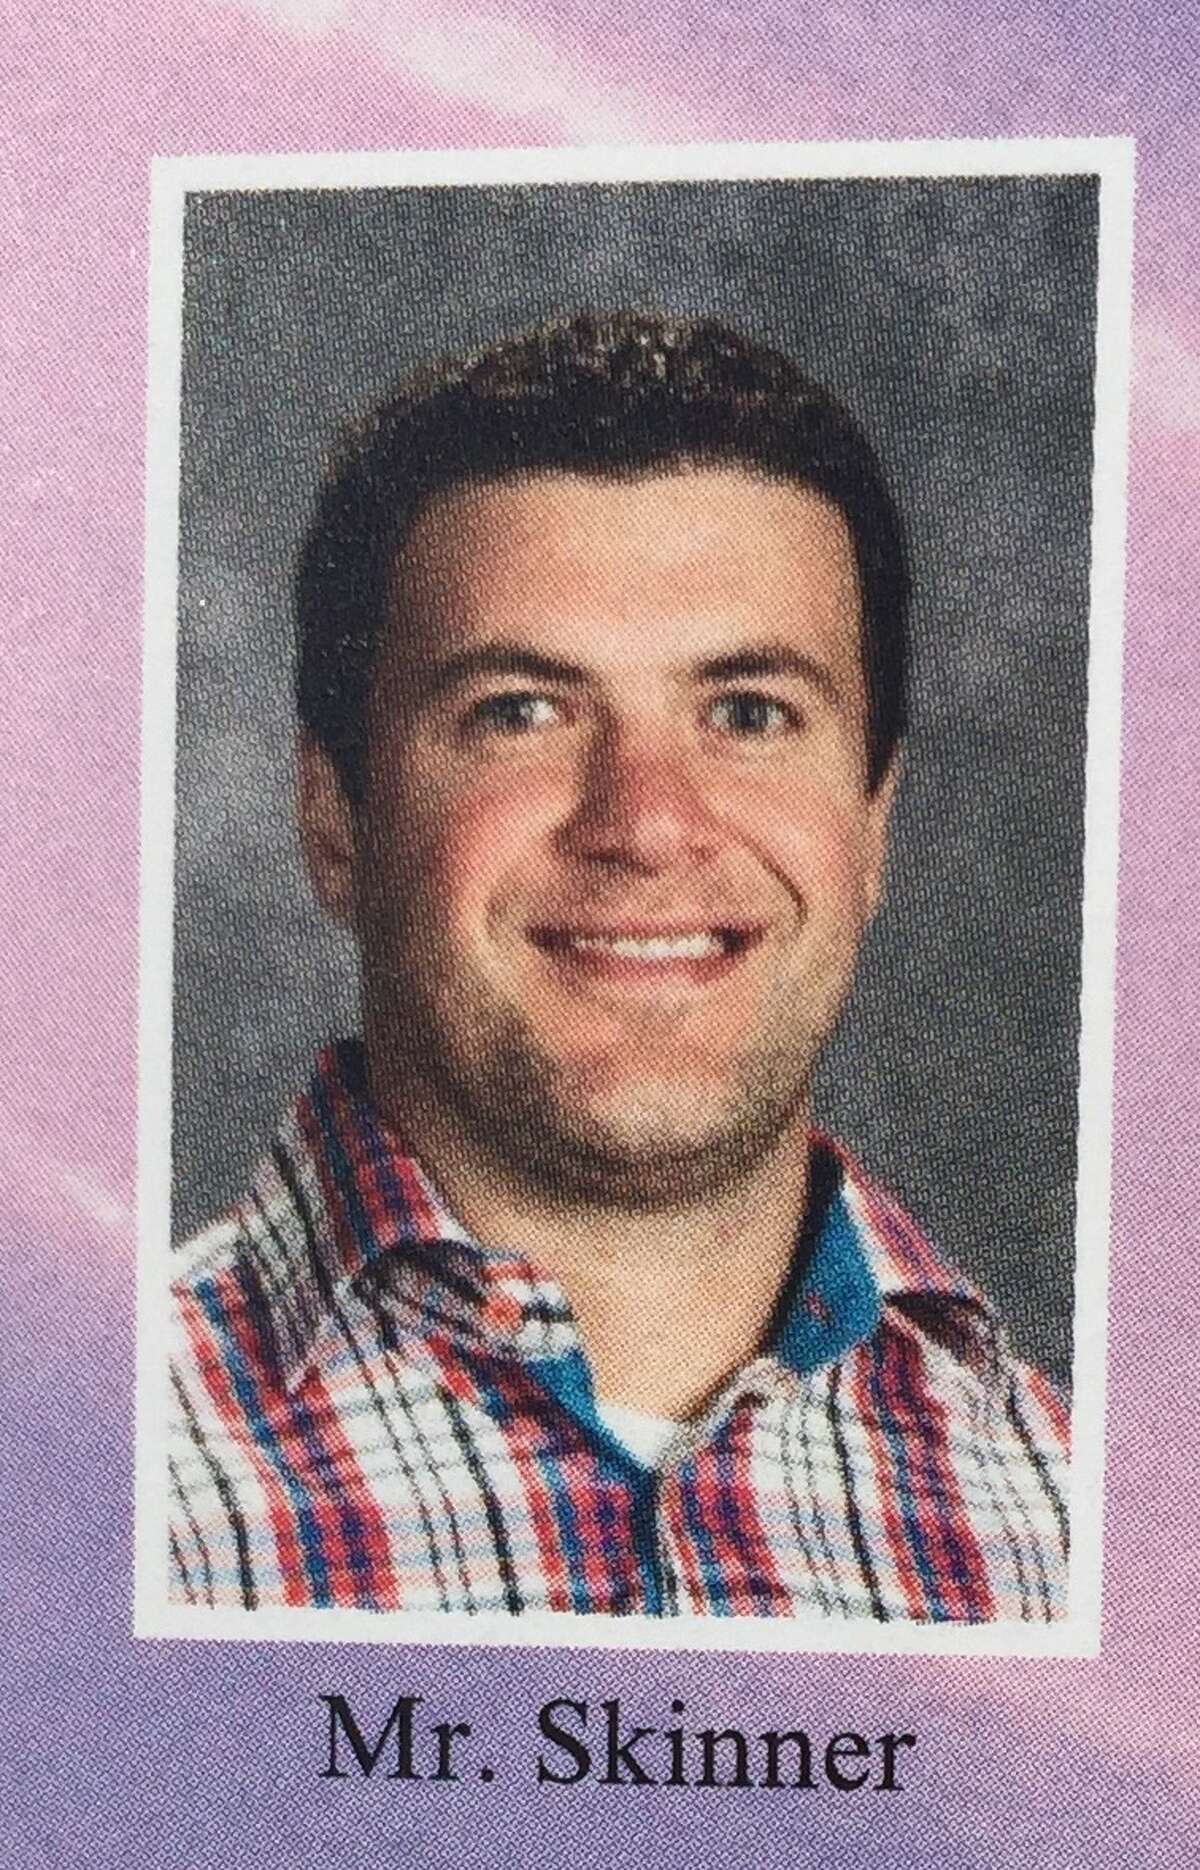 Orenda Elementary School fifth-grade teacher Brian Skinner, as seen in a Shenendehowa Central District 2017 yearbook photo. Skinner was killed in a police shooting at his Glenville home July 28, 2017.